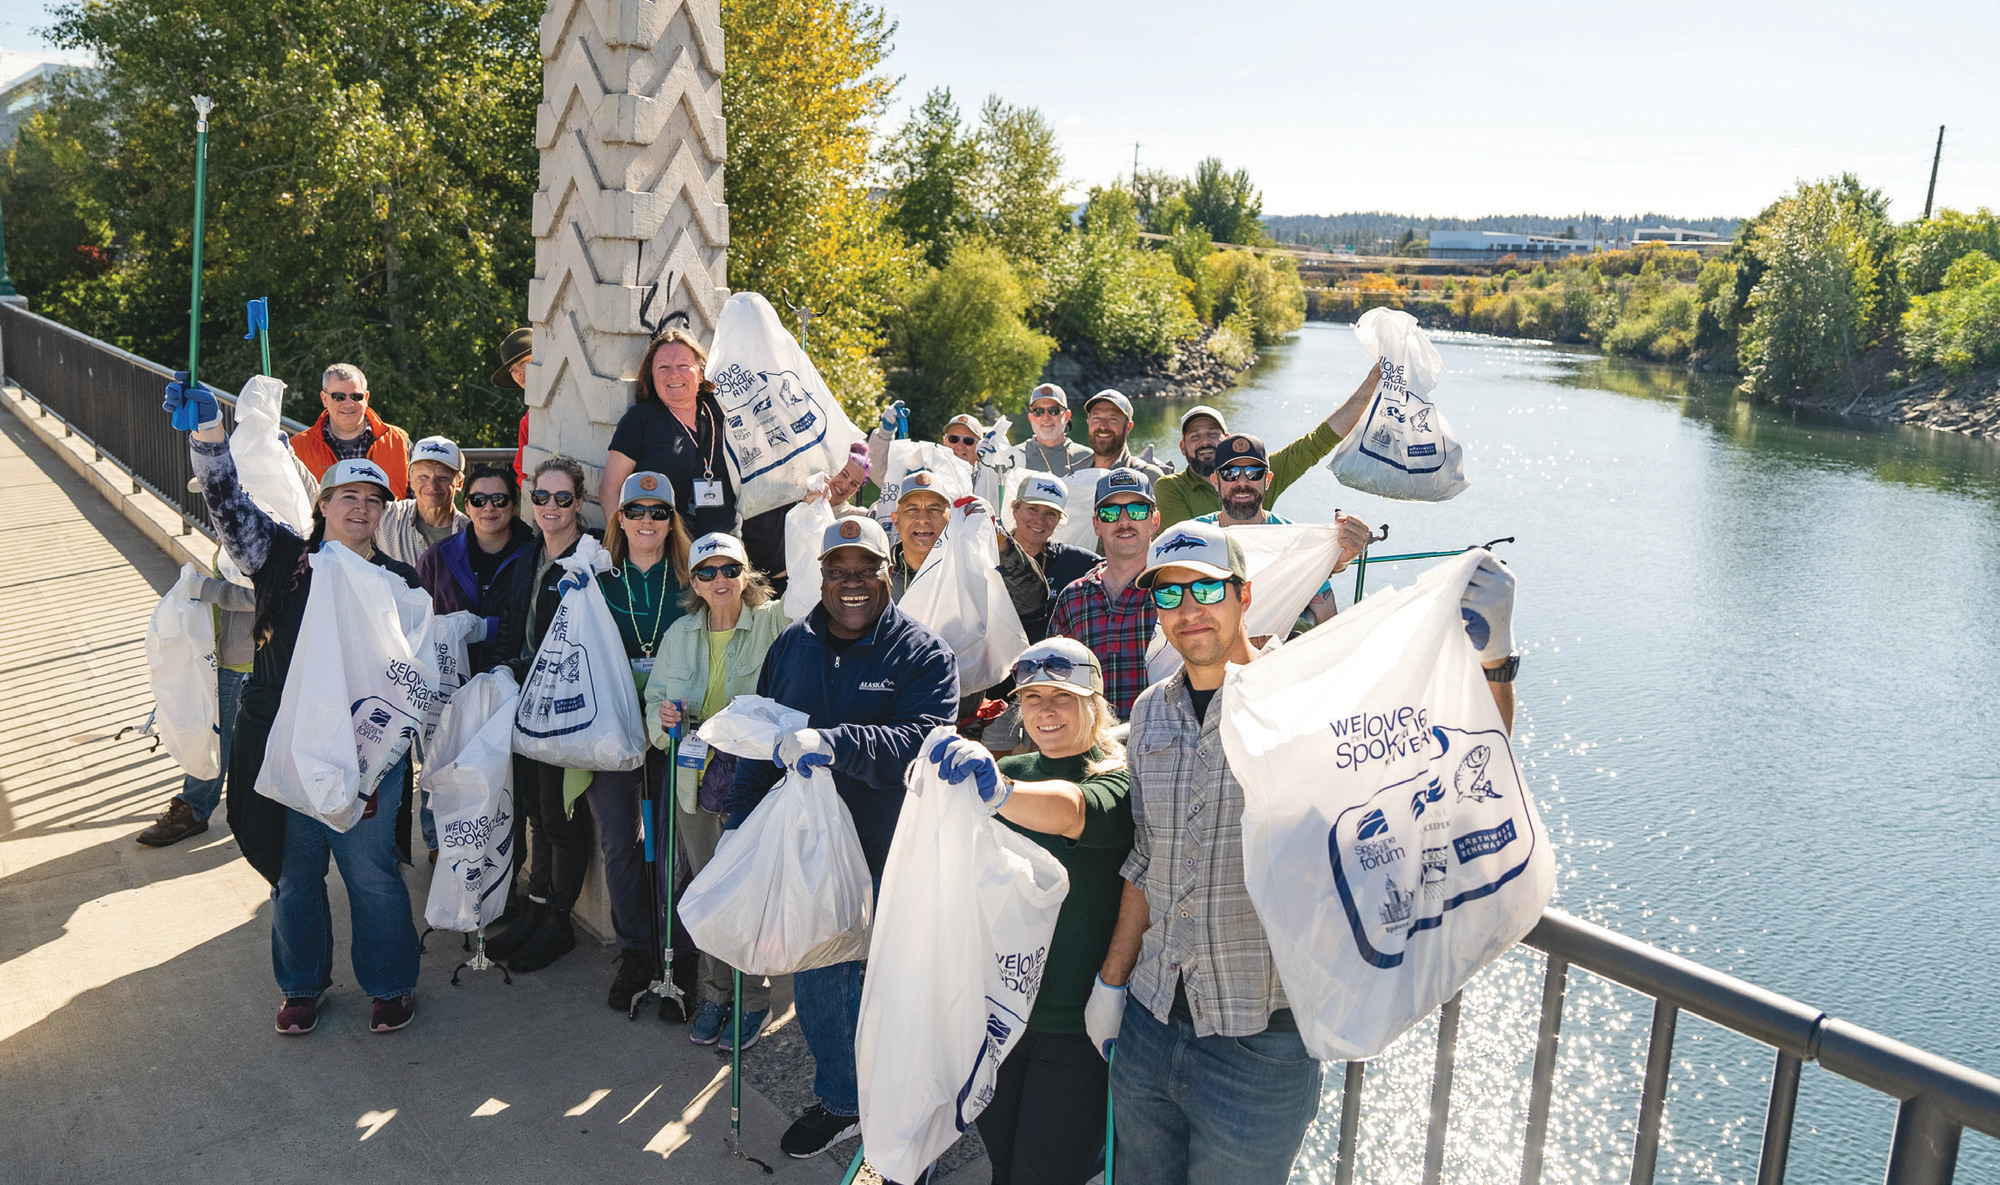 A Spokane Riverkeeper cleanup event with Trout Unlimited.